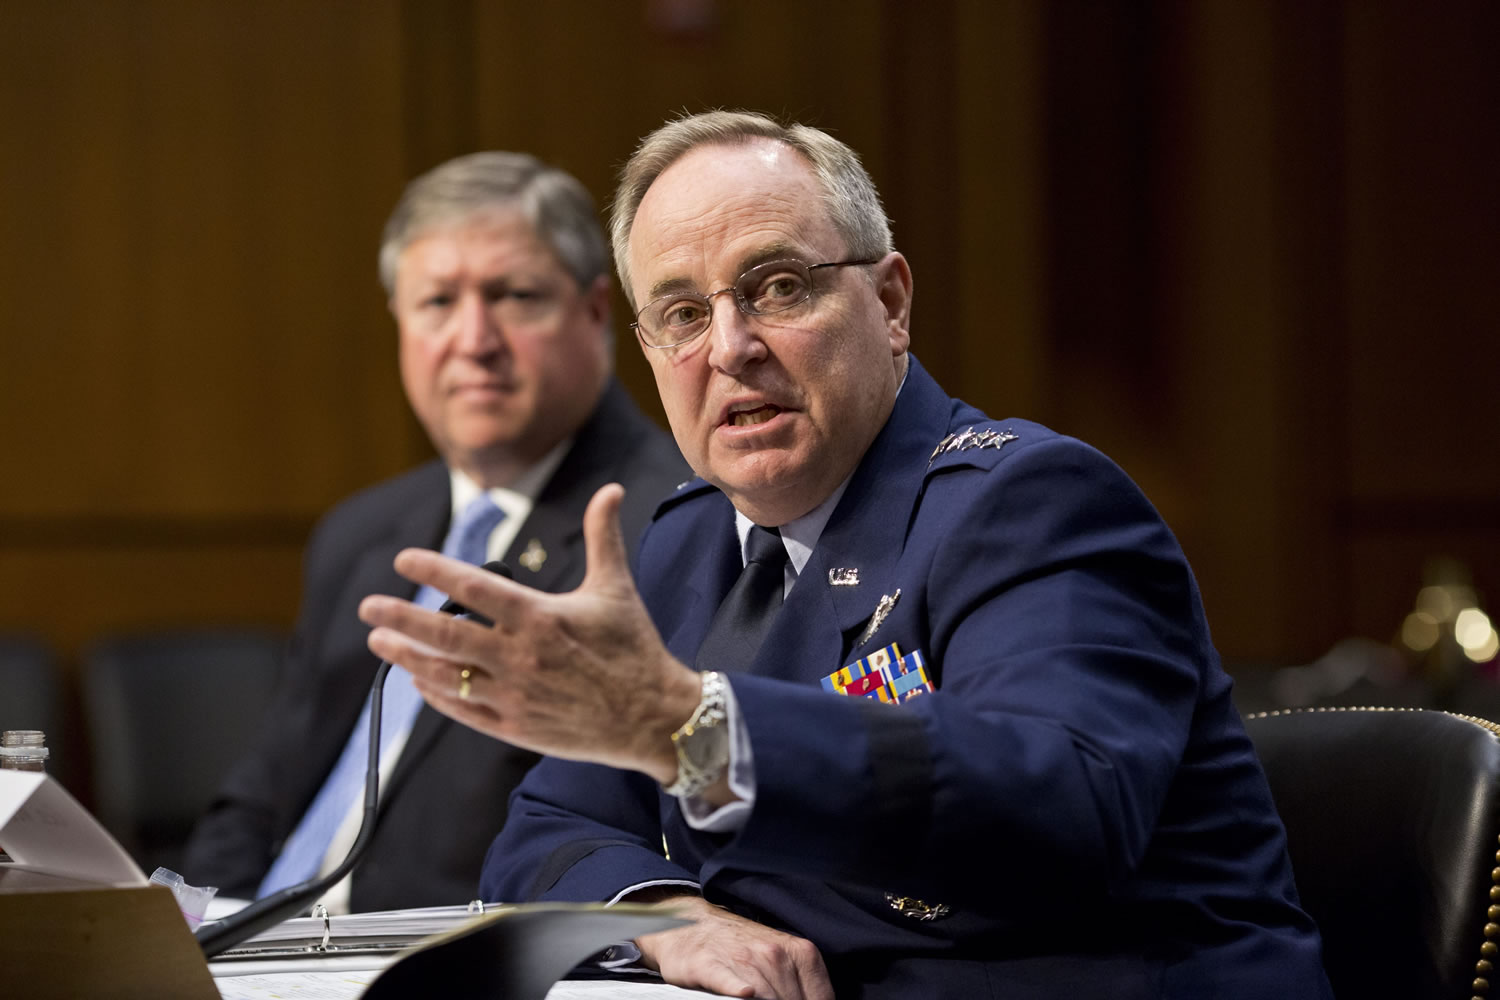 The Senate Armed Services Committee hears from top officials of the Air Force, Air Force Chief of Staff Gen. Mark A. Welsh III, right, and Secretary of the Air Force Michael B. Donley, left, during a hearing on Capitol Hill in Washington on Tuesday .